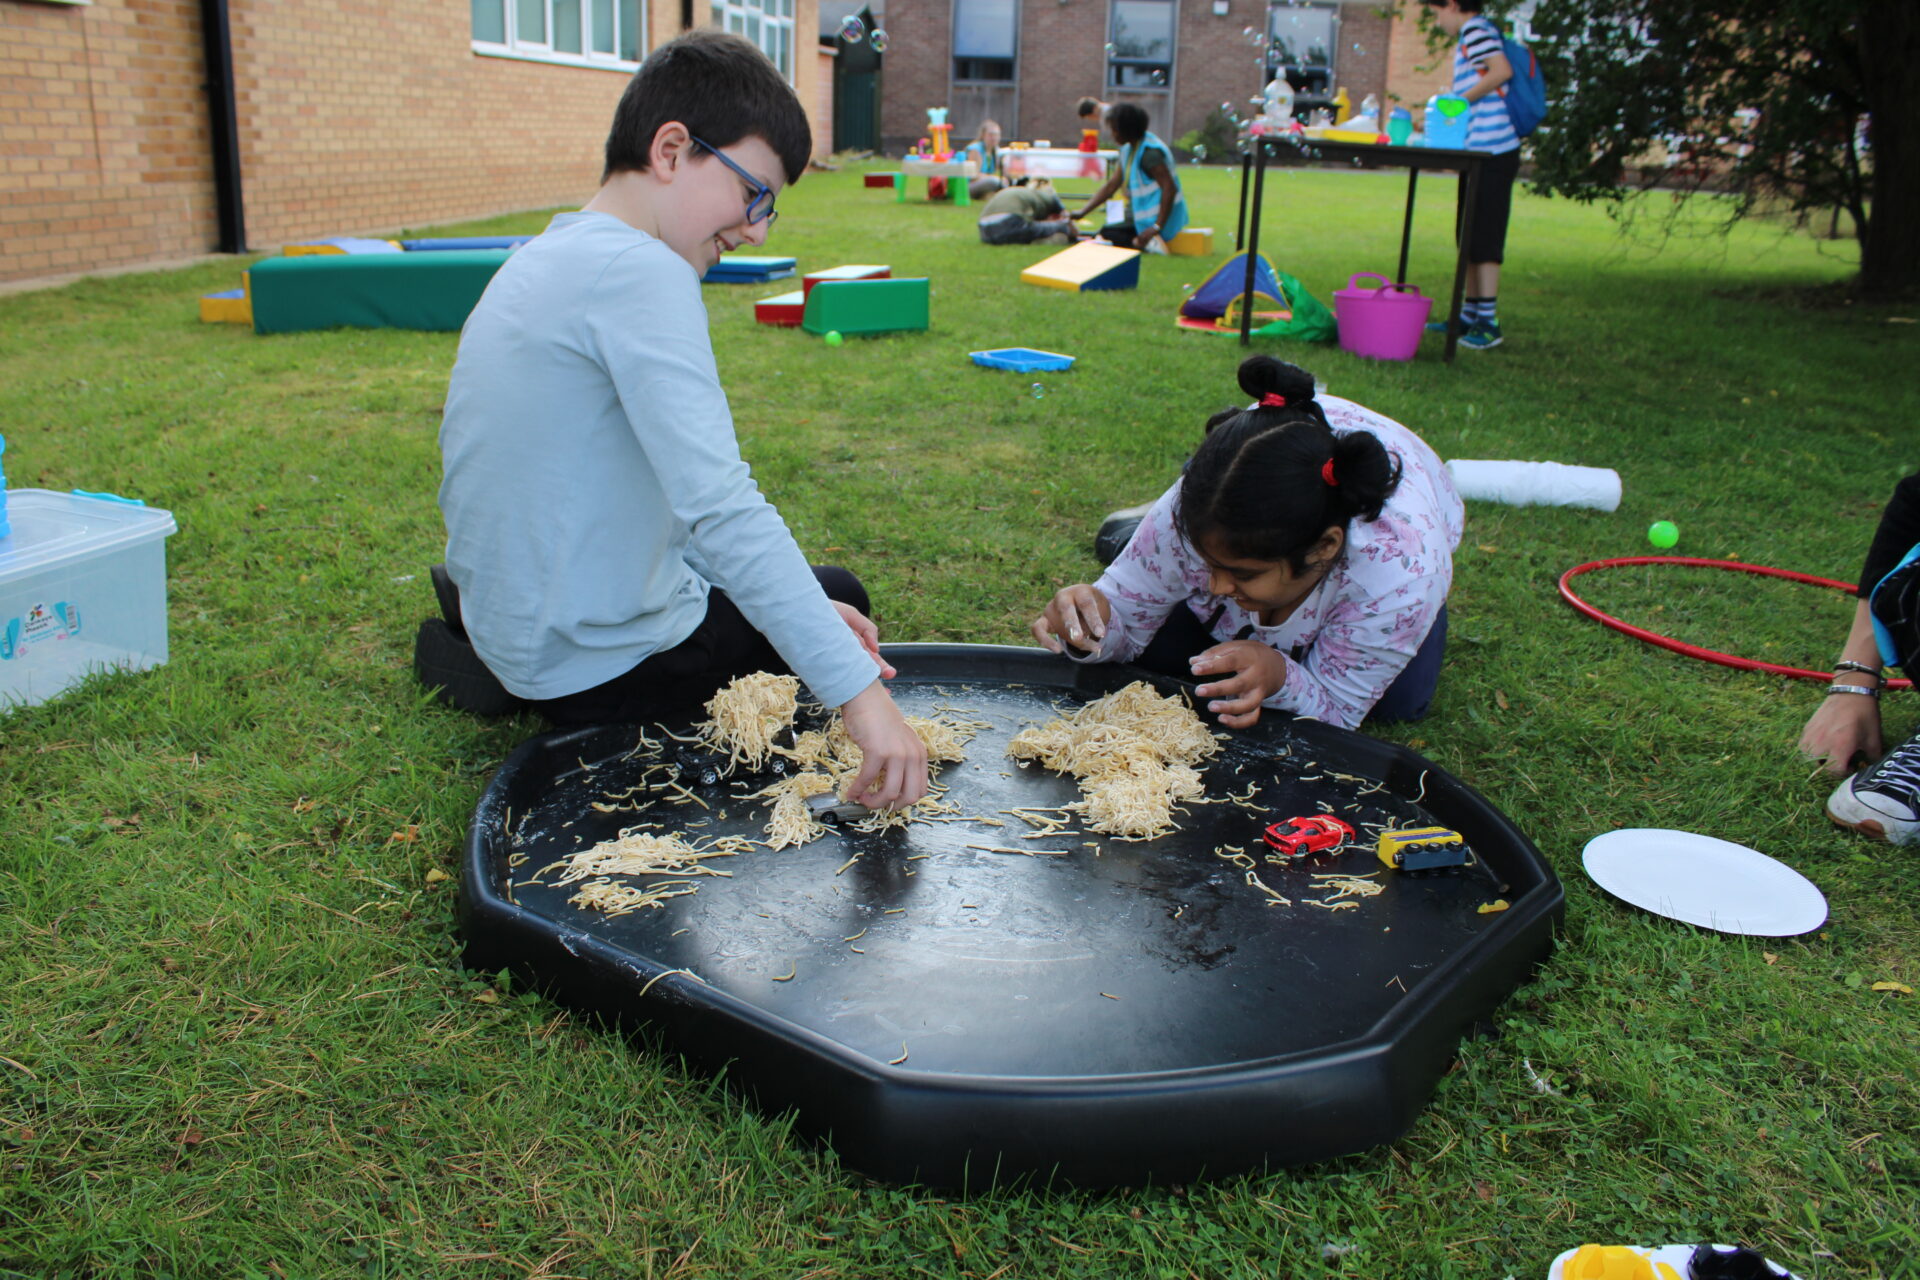 A young boy and girl sitting outside on the grass doing sensory play.